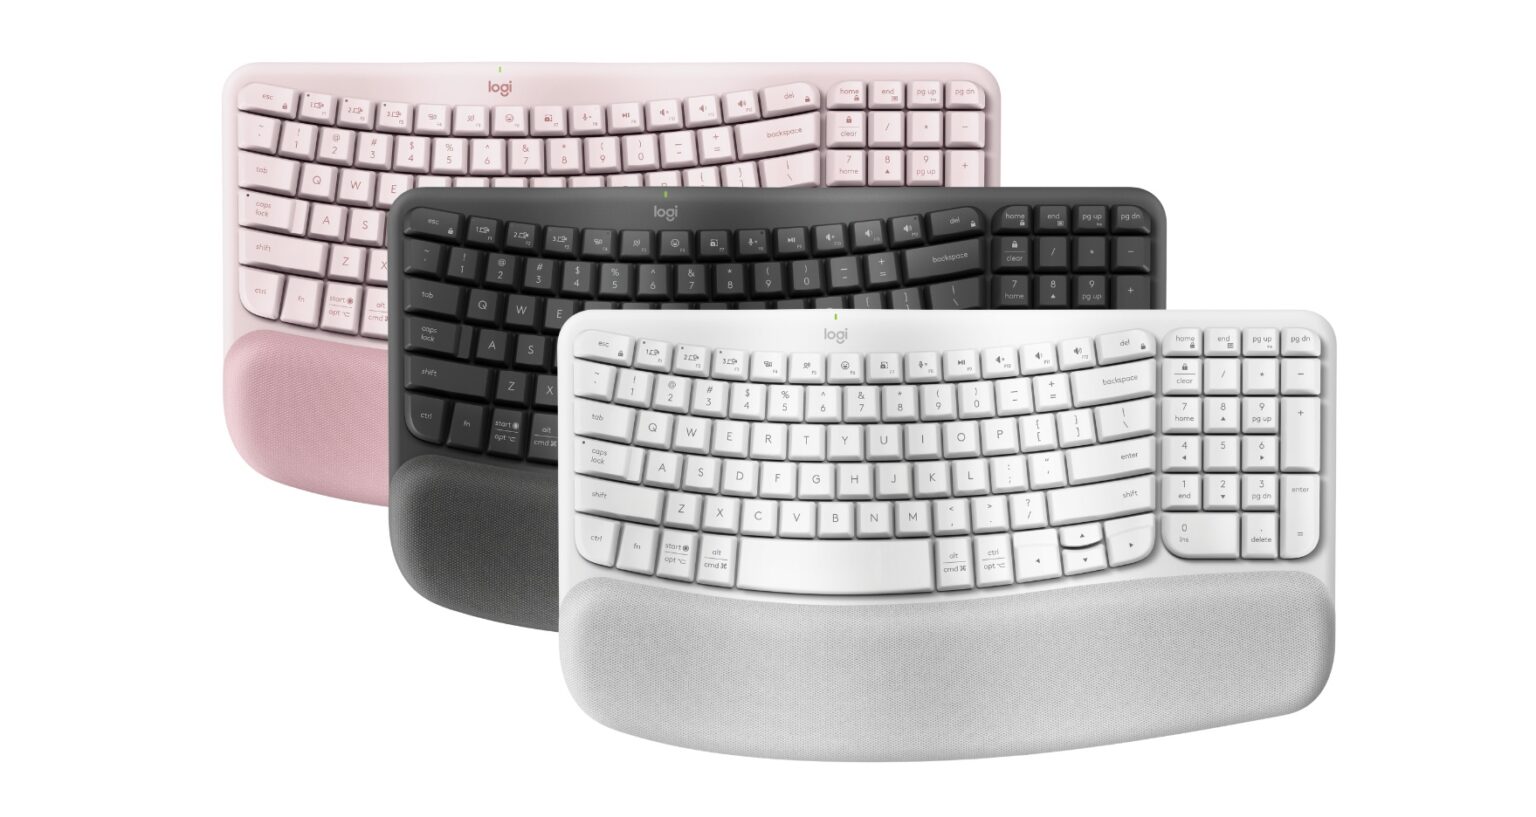 Logitech's Wave Keys keyboards are all about comfort and come in three color choices.